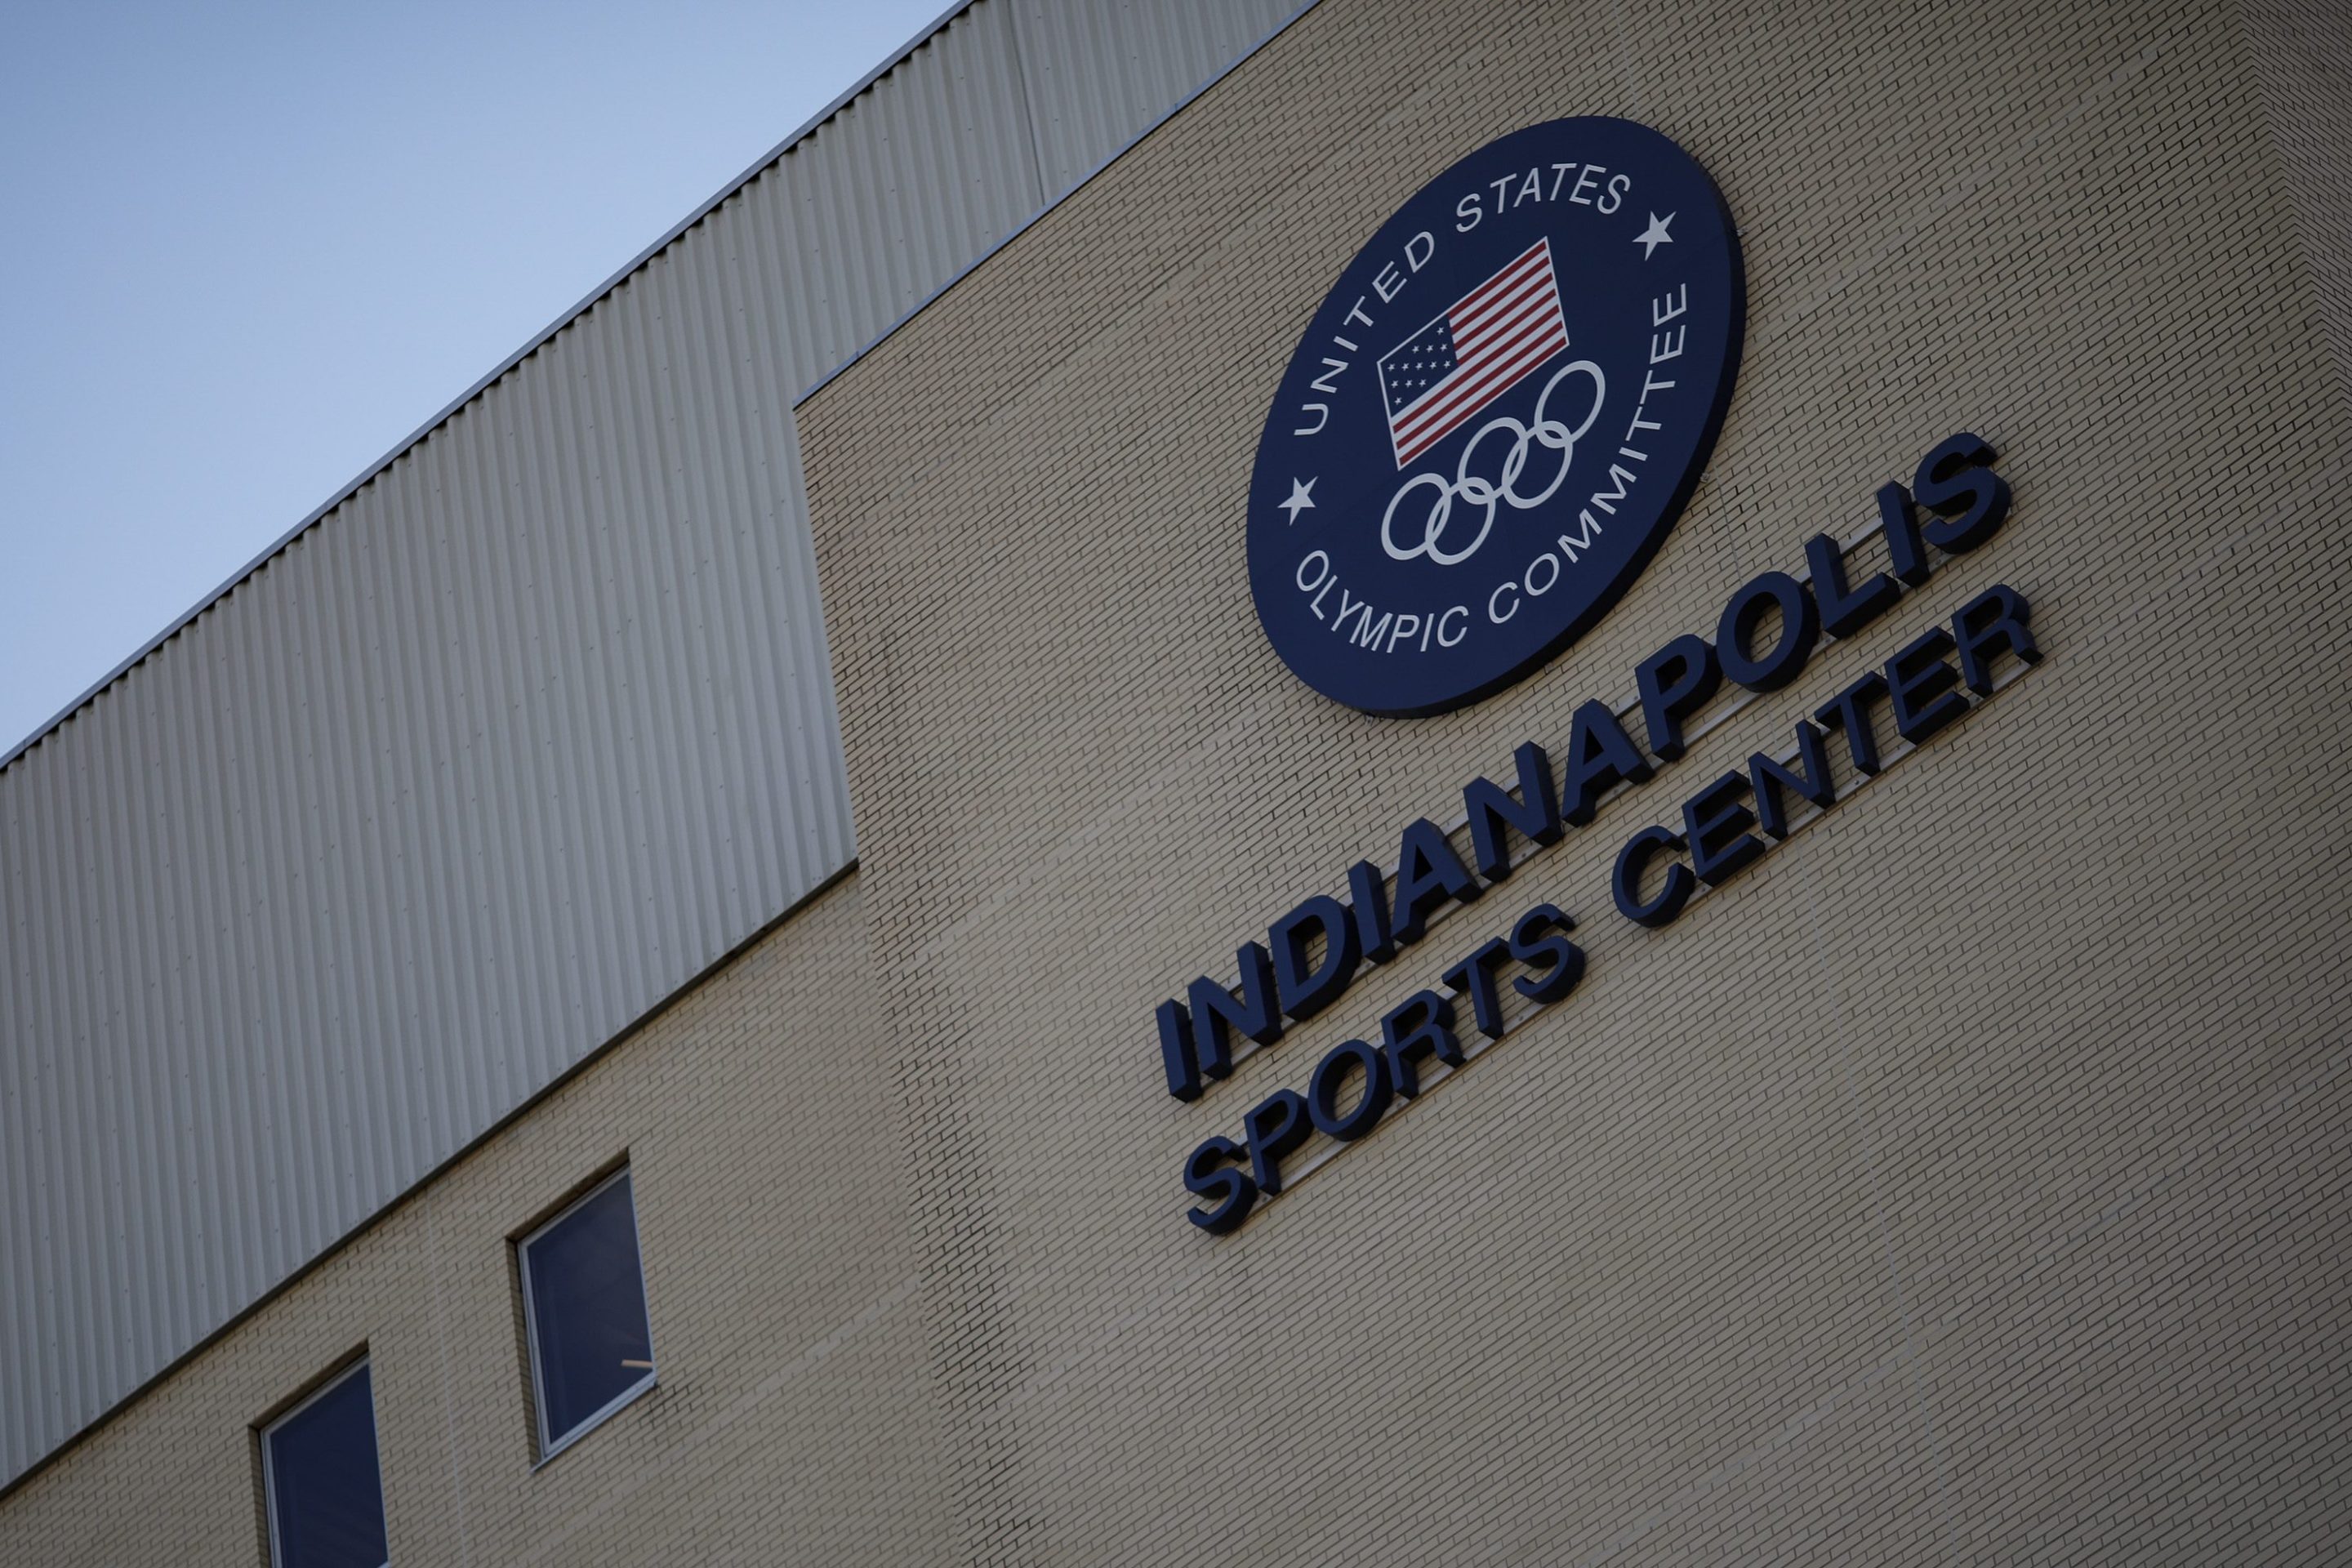 The offices of USA Gymnastics and the US Olympic and Paralympic Committee are seen on November 6, 2018 in Indianapolis, Indiana.